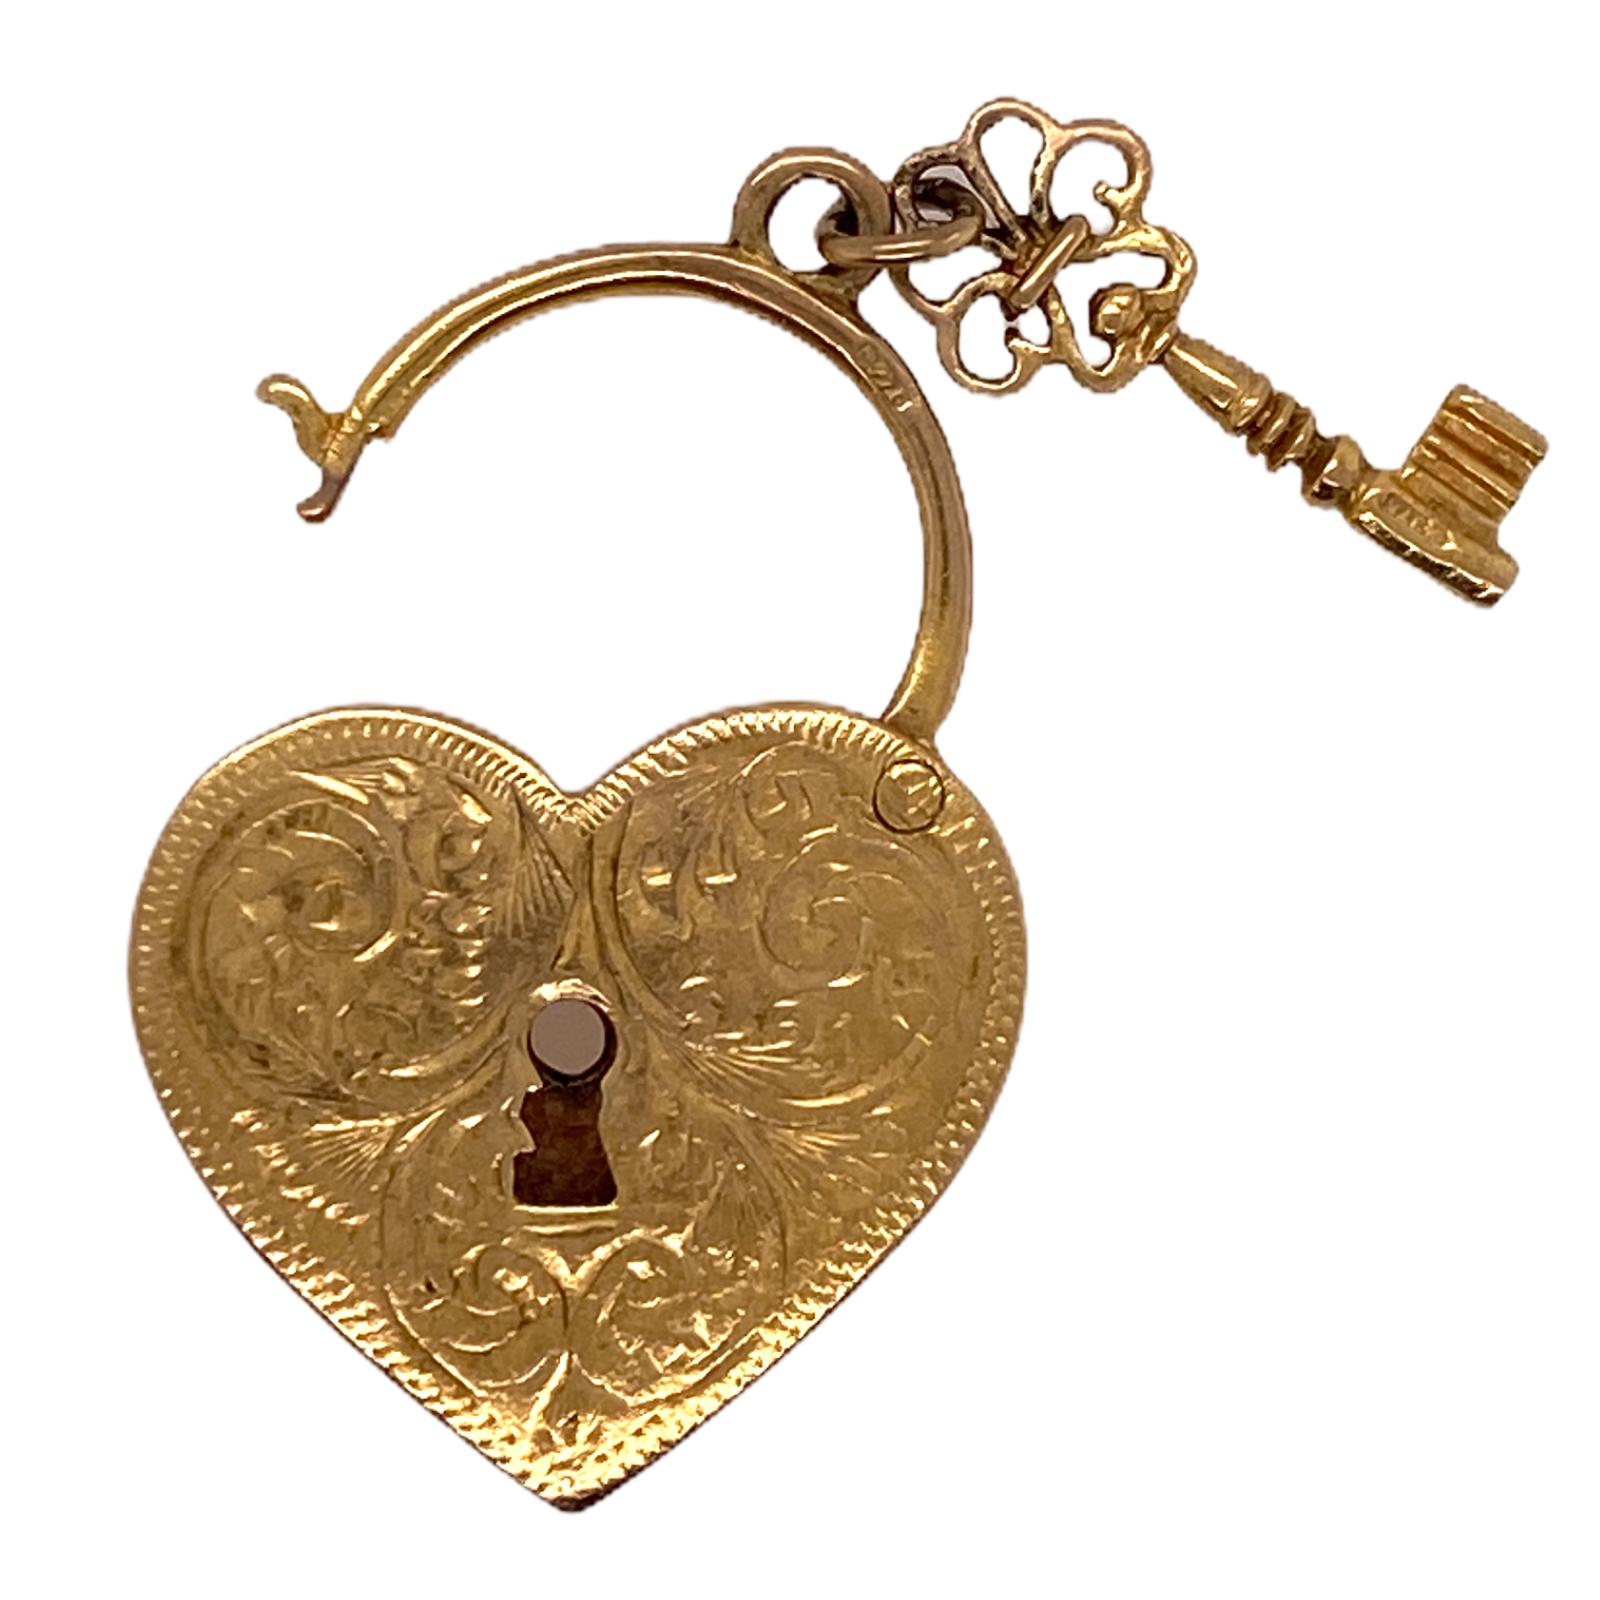 Original vintage heart lock and key charm fashioned in 9 karat yellow gold. The English made charm opens & closes, and measures 1.0 x 1.25 inches. European hallmarks. 